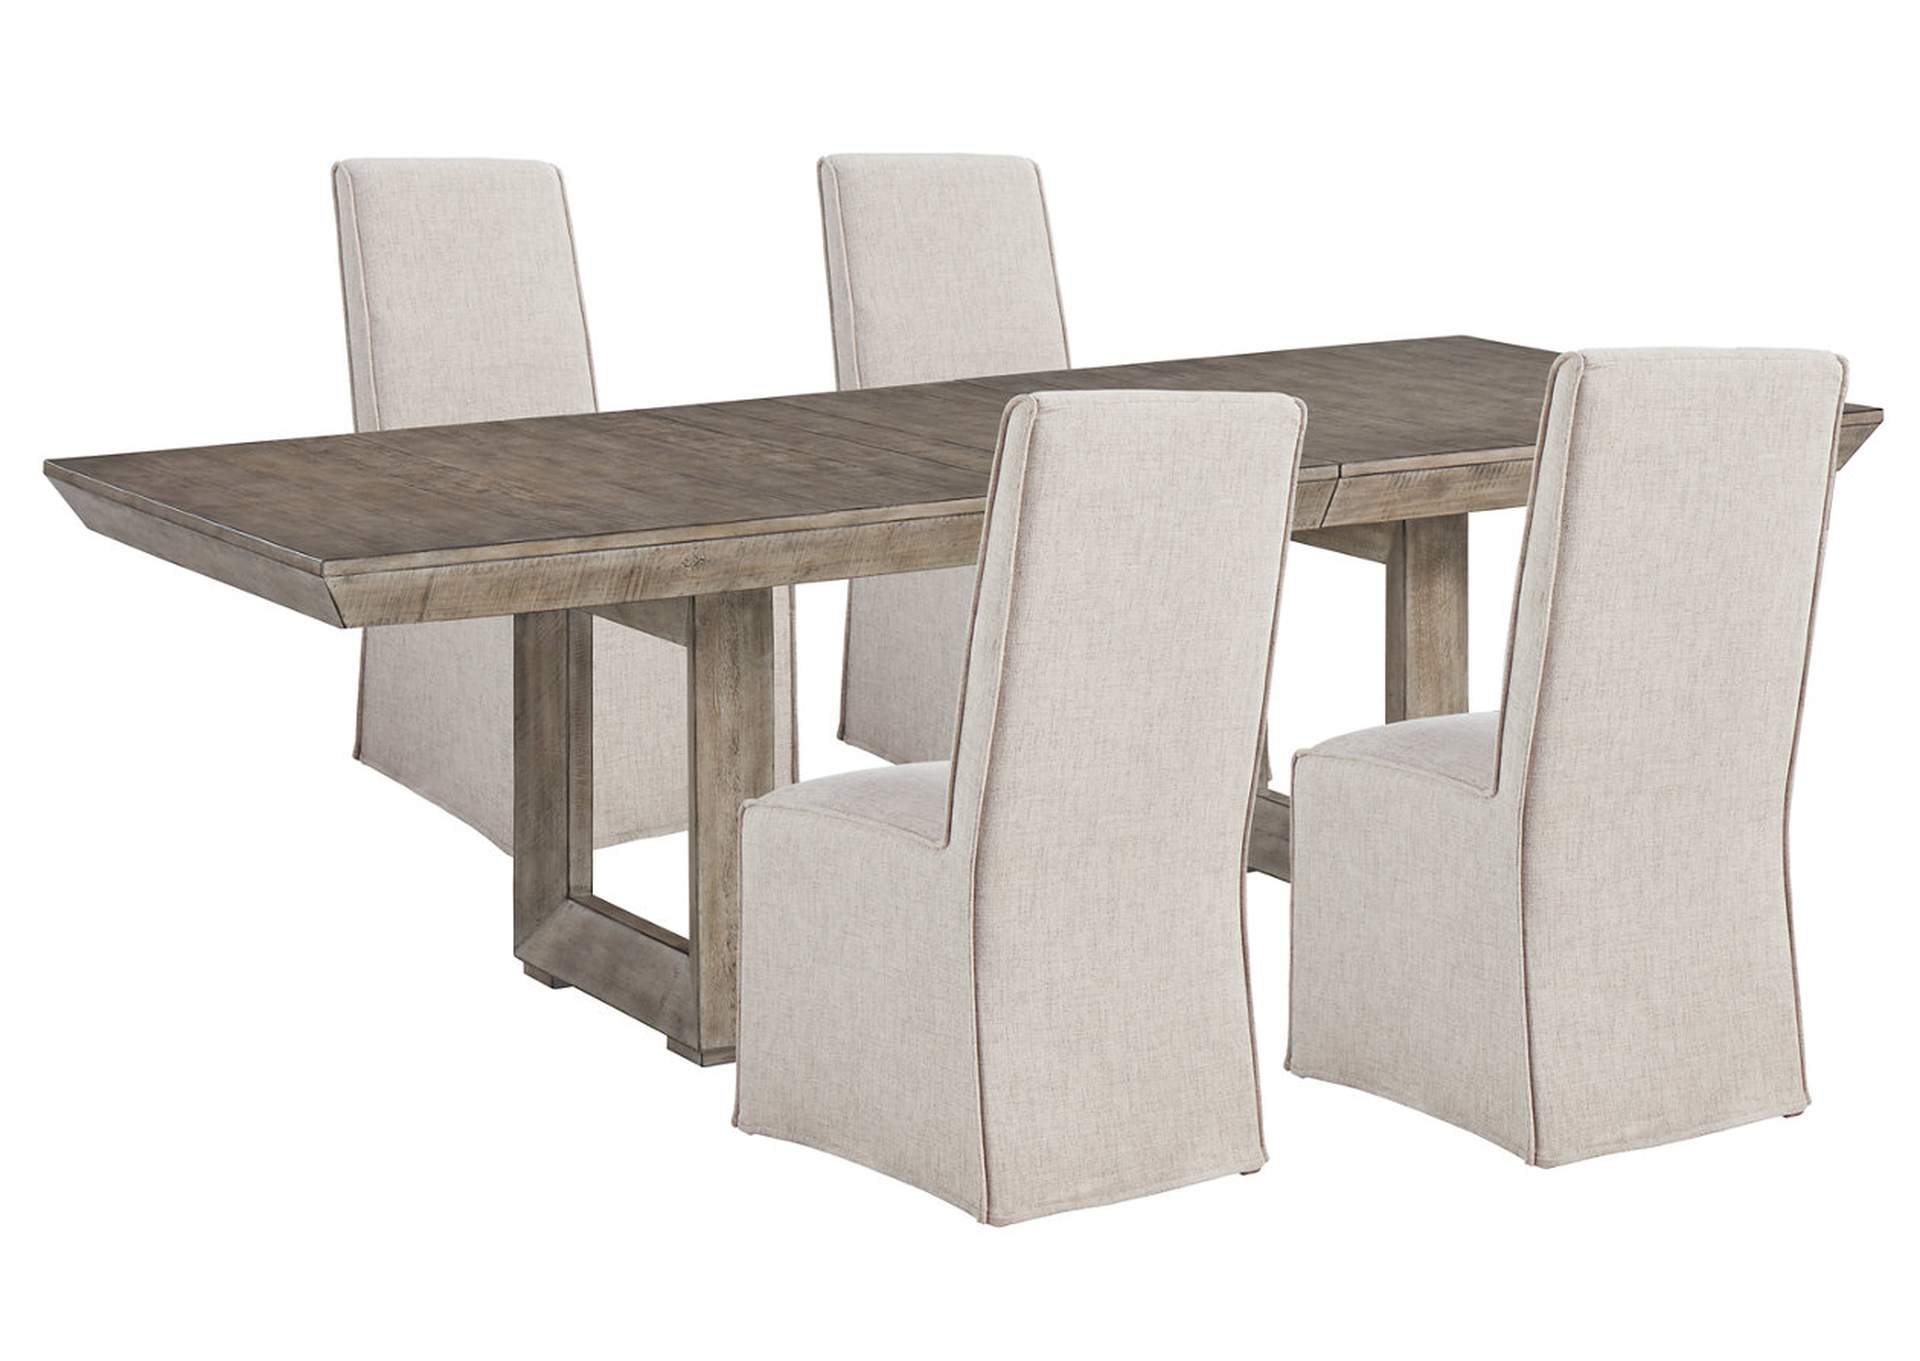 Langford Dining Table and 4 Chairs,Millennium